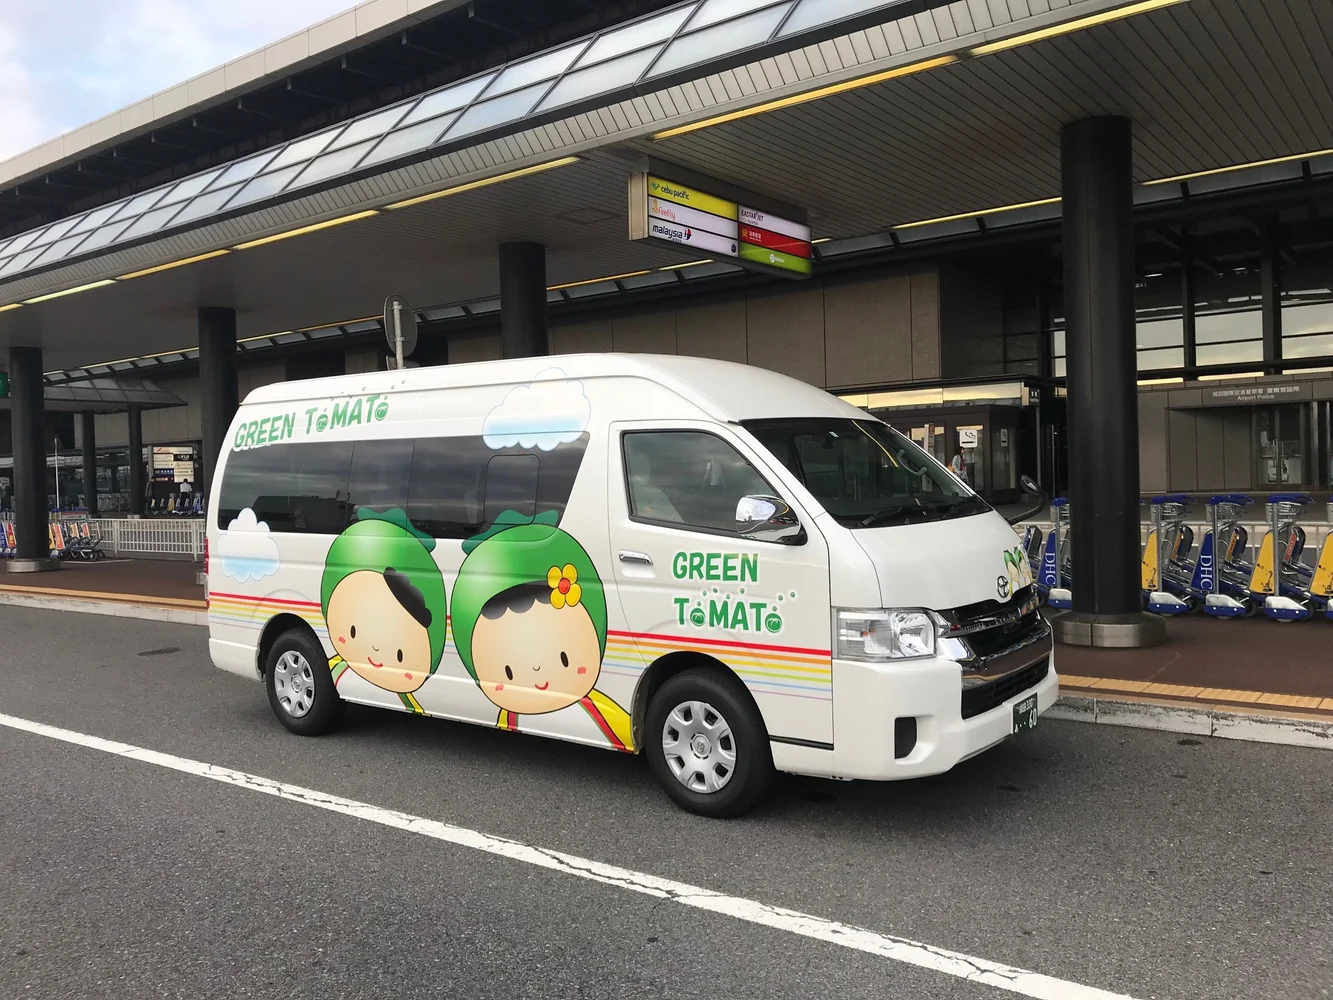 Narita Airport Shuttle Transfer for Central Tokyo or Maihama Area